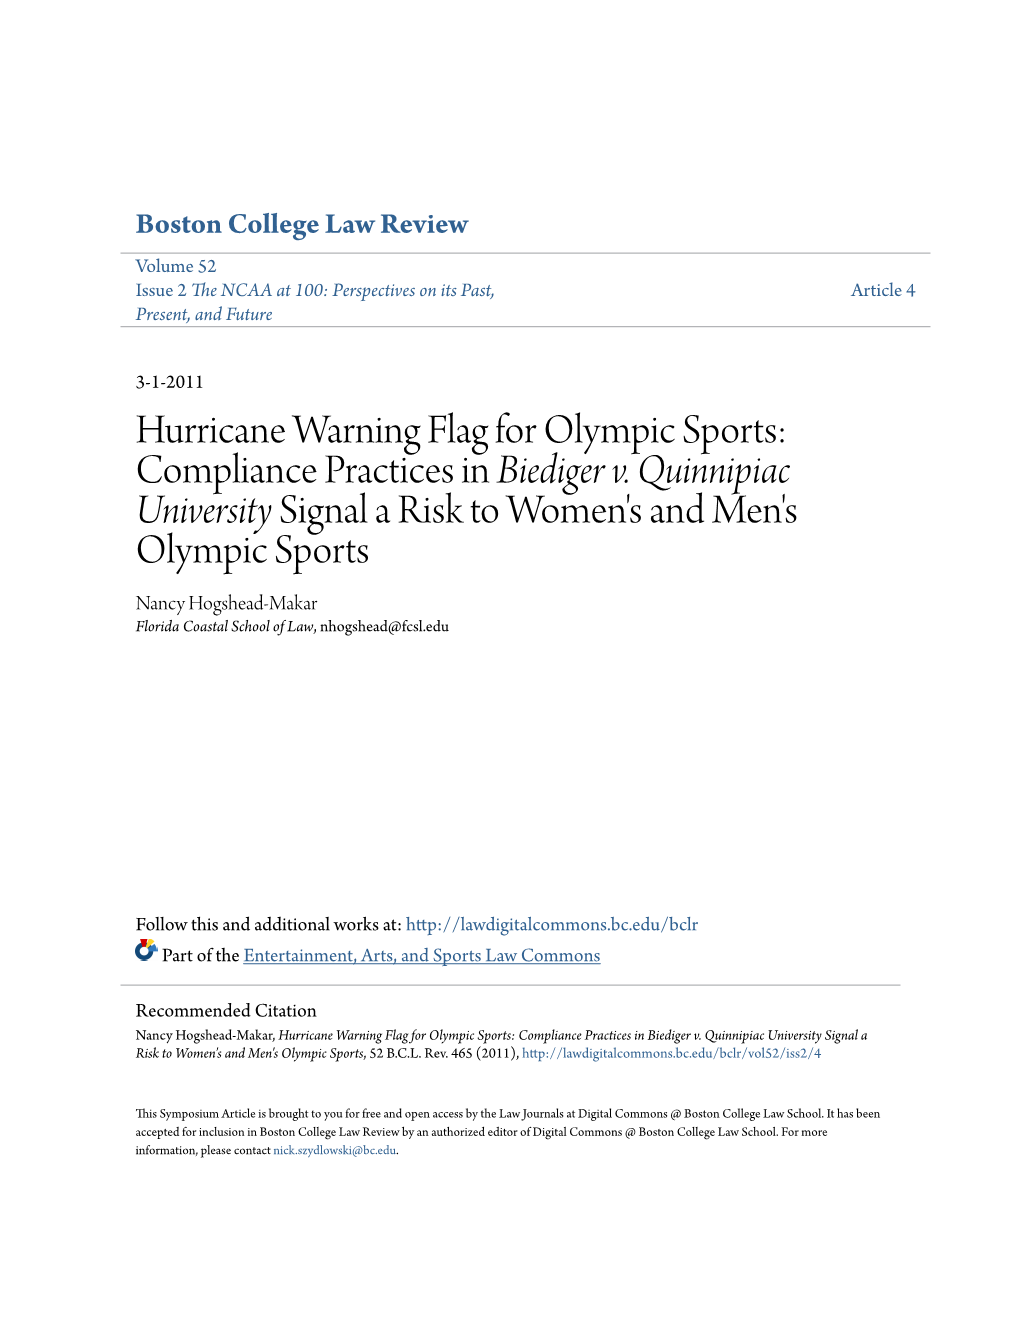 Hurricane Warning Flag for Olympic Sports: Compliance Practices in Biediger V